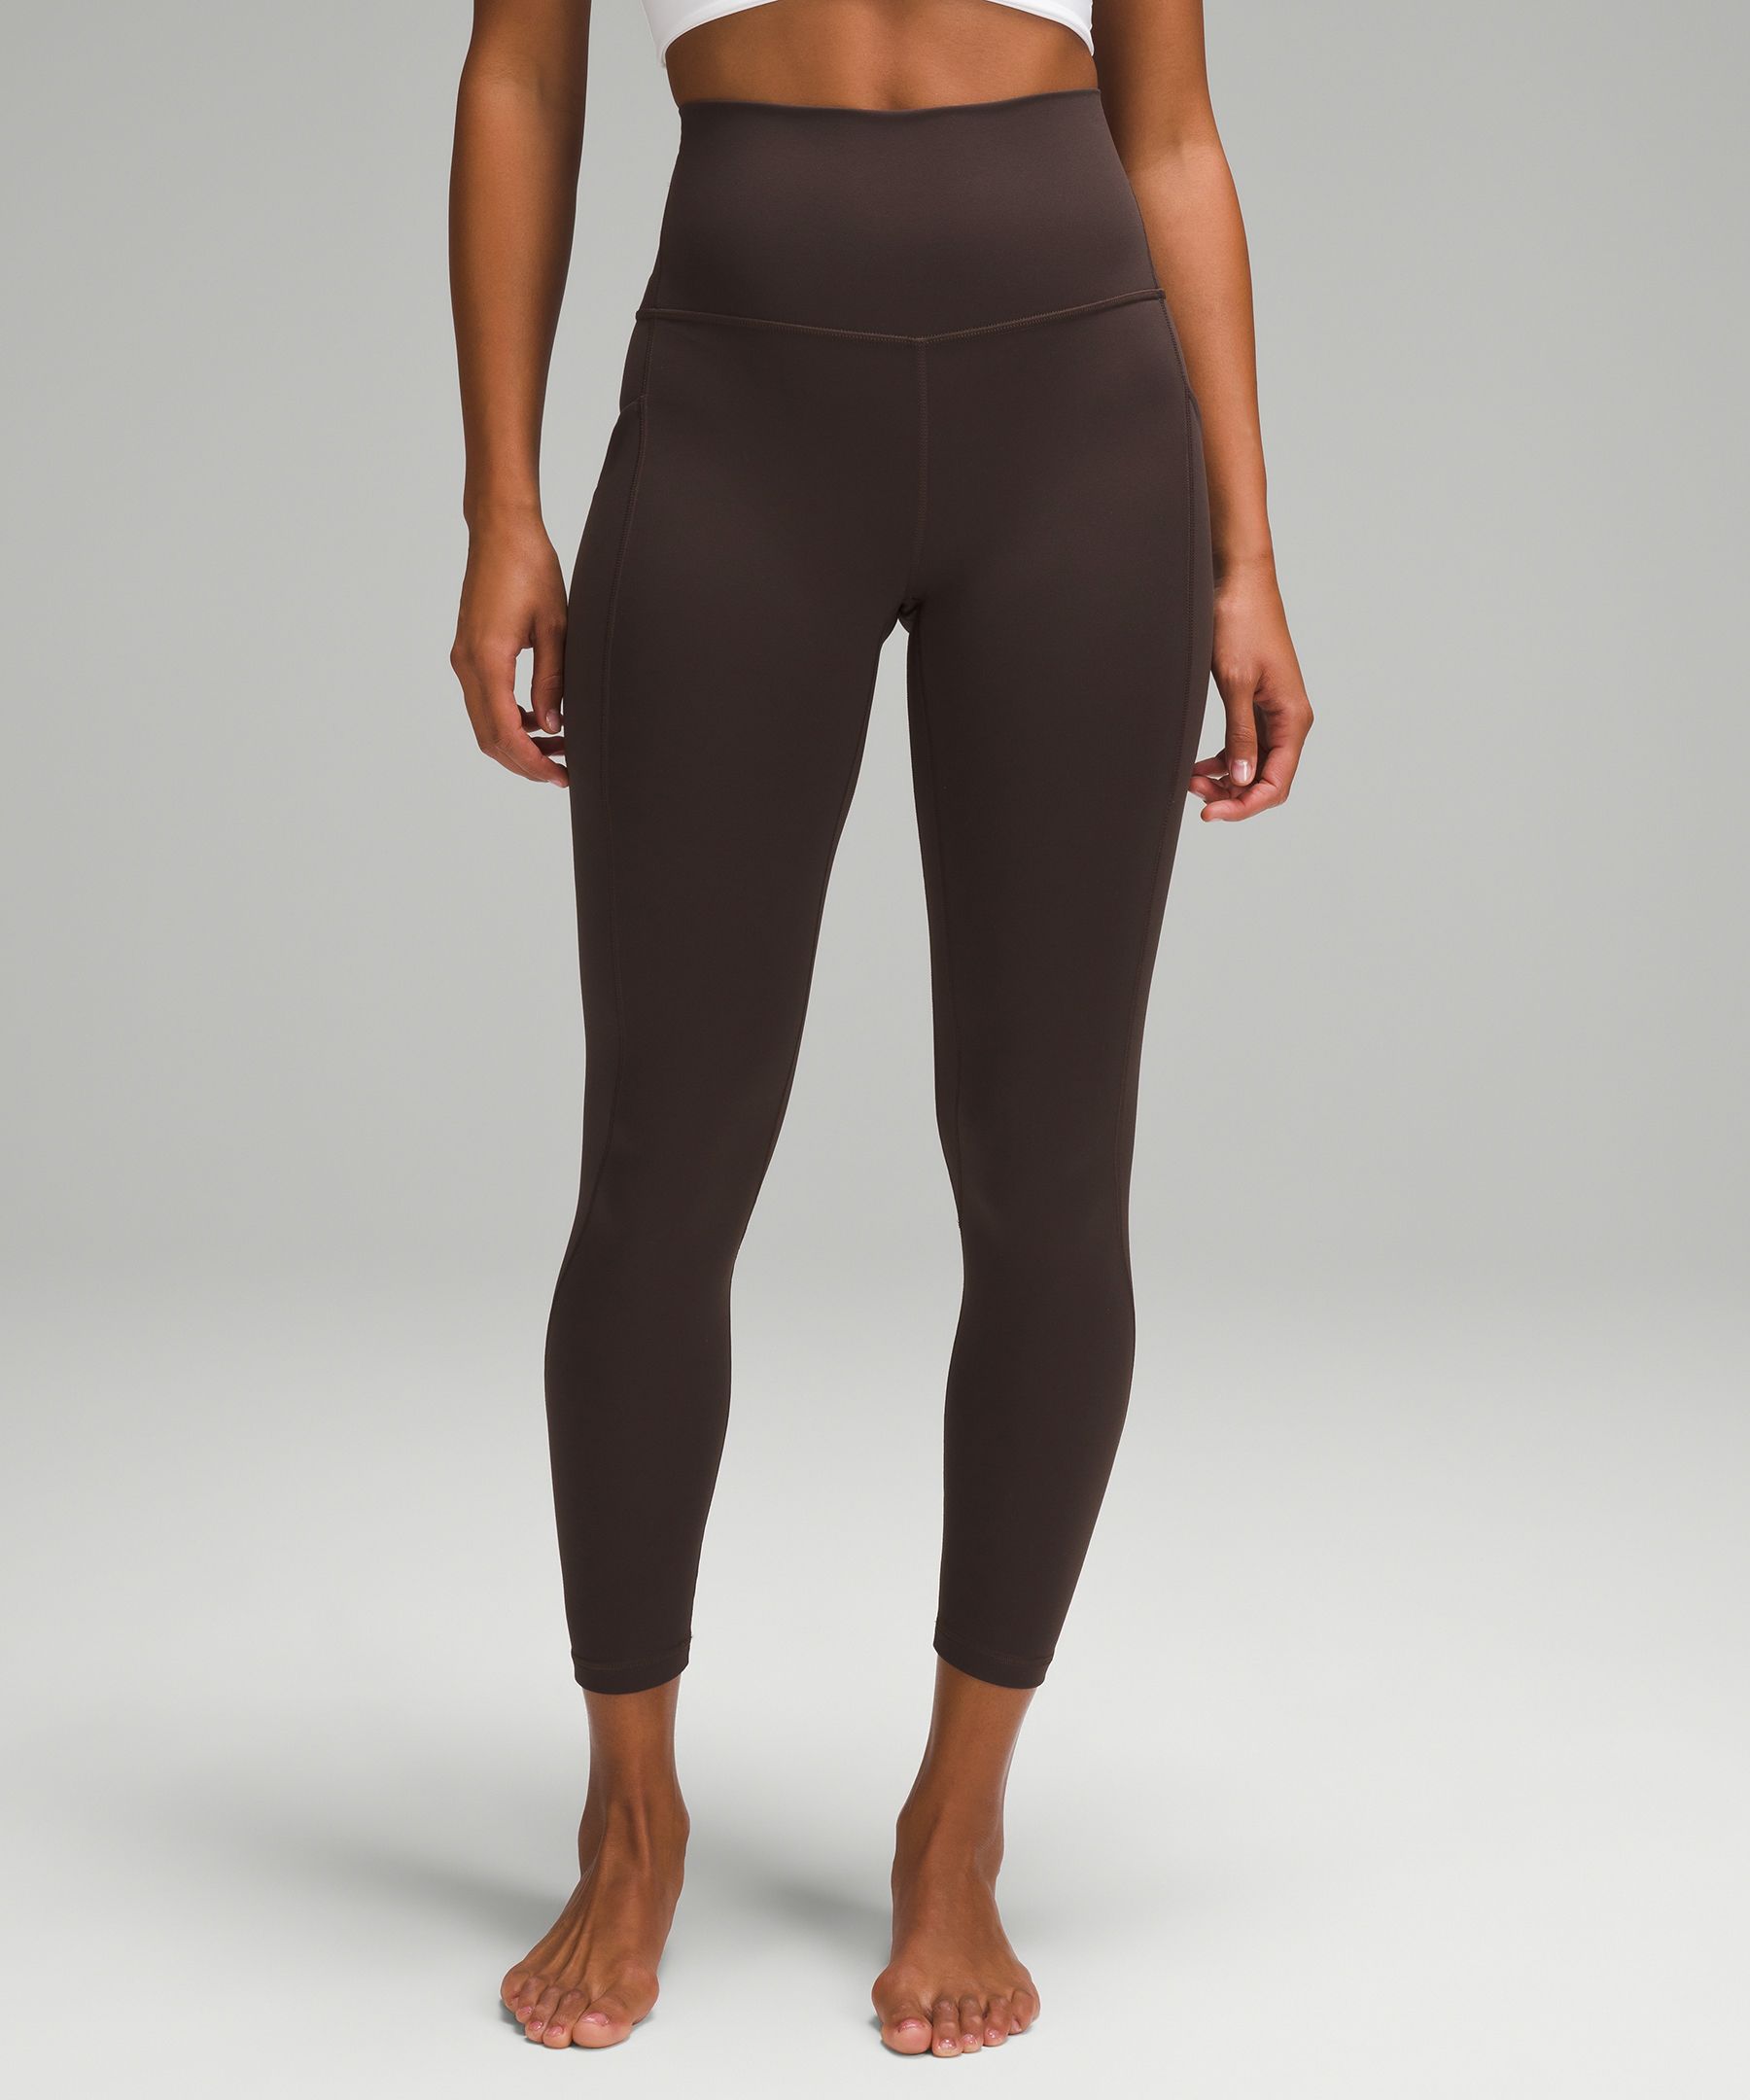 Lululemon Align™ High-rise Pant With Pockets 25"